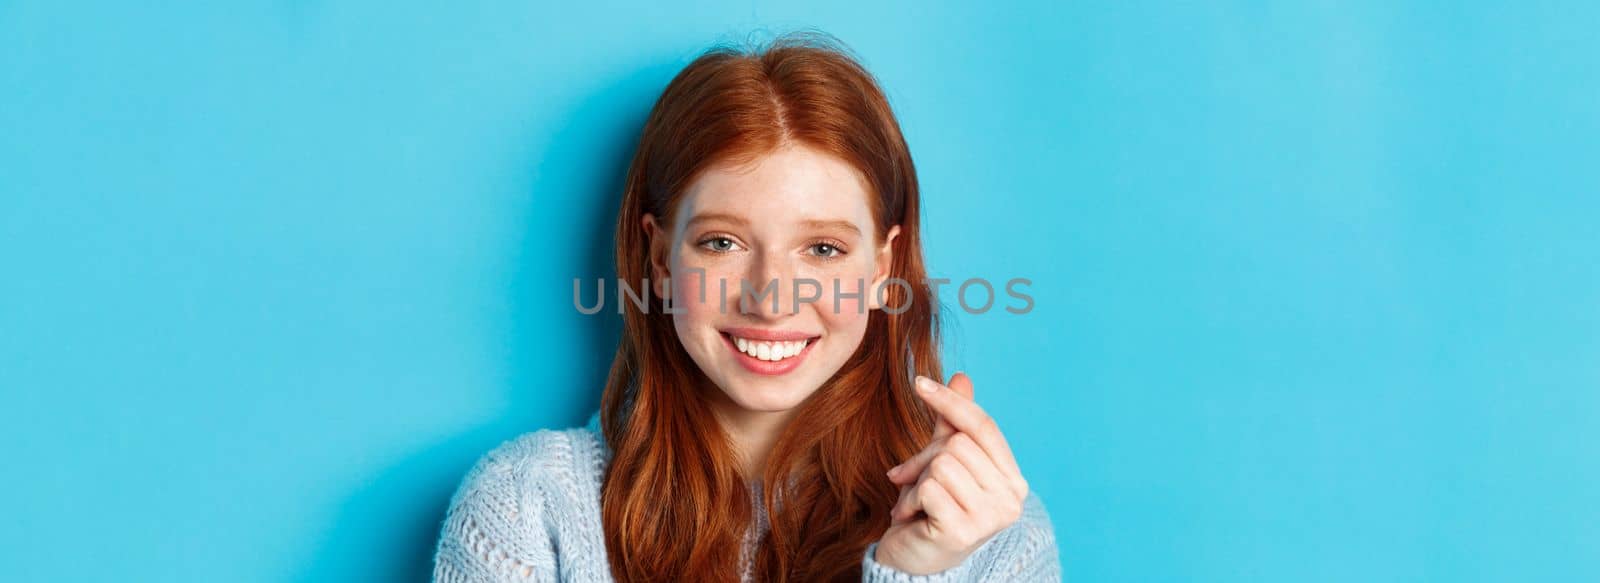 Headshot of cute caucasian woman with red hair and freckles showing heart sign and smiling, standing against blue background.